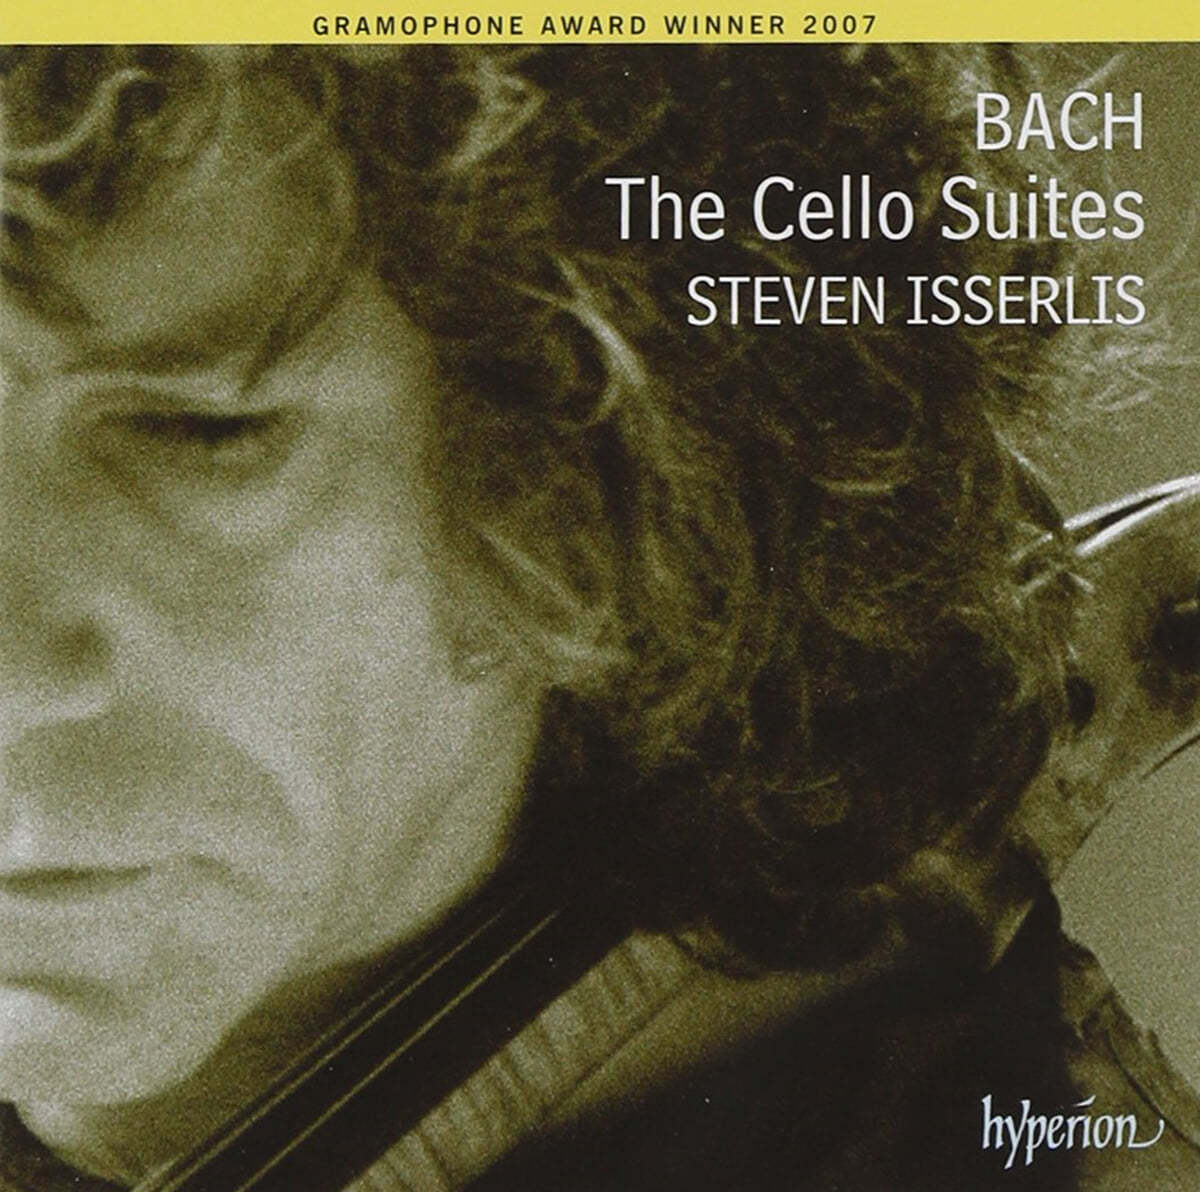 Steven Isserlis 바흐: 첼로 모음곡, 새의 노래 (Bach: The Cello Suites, The Song of the Birds) 